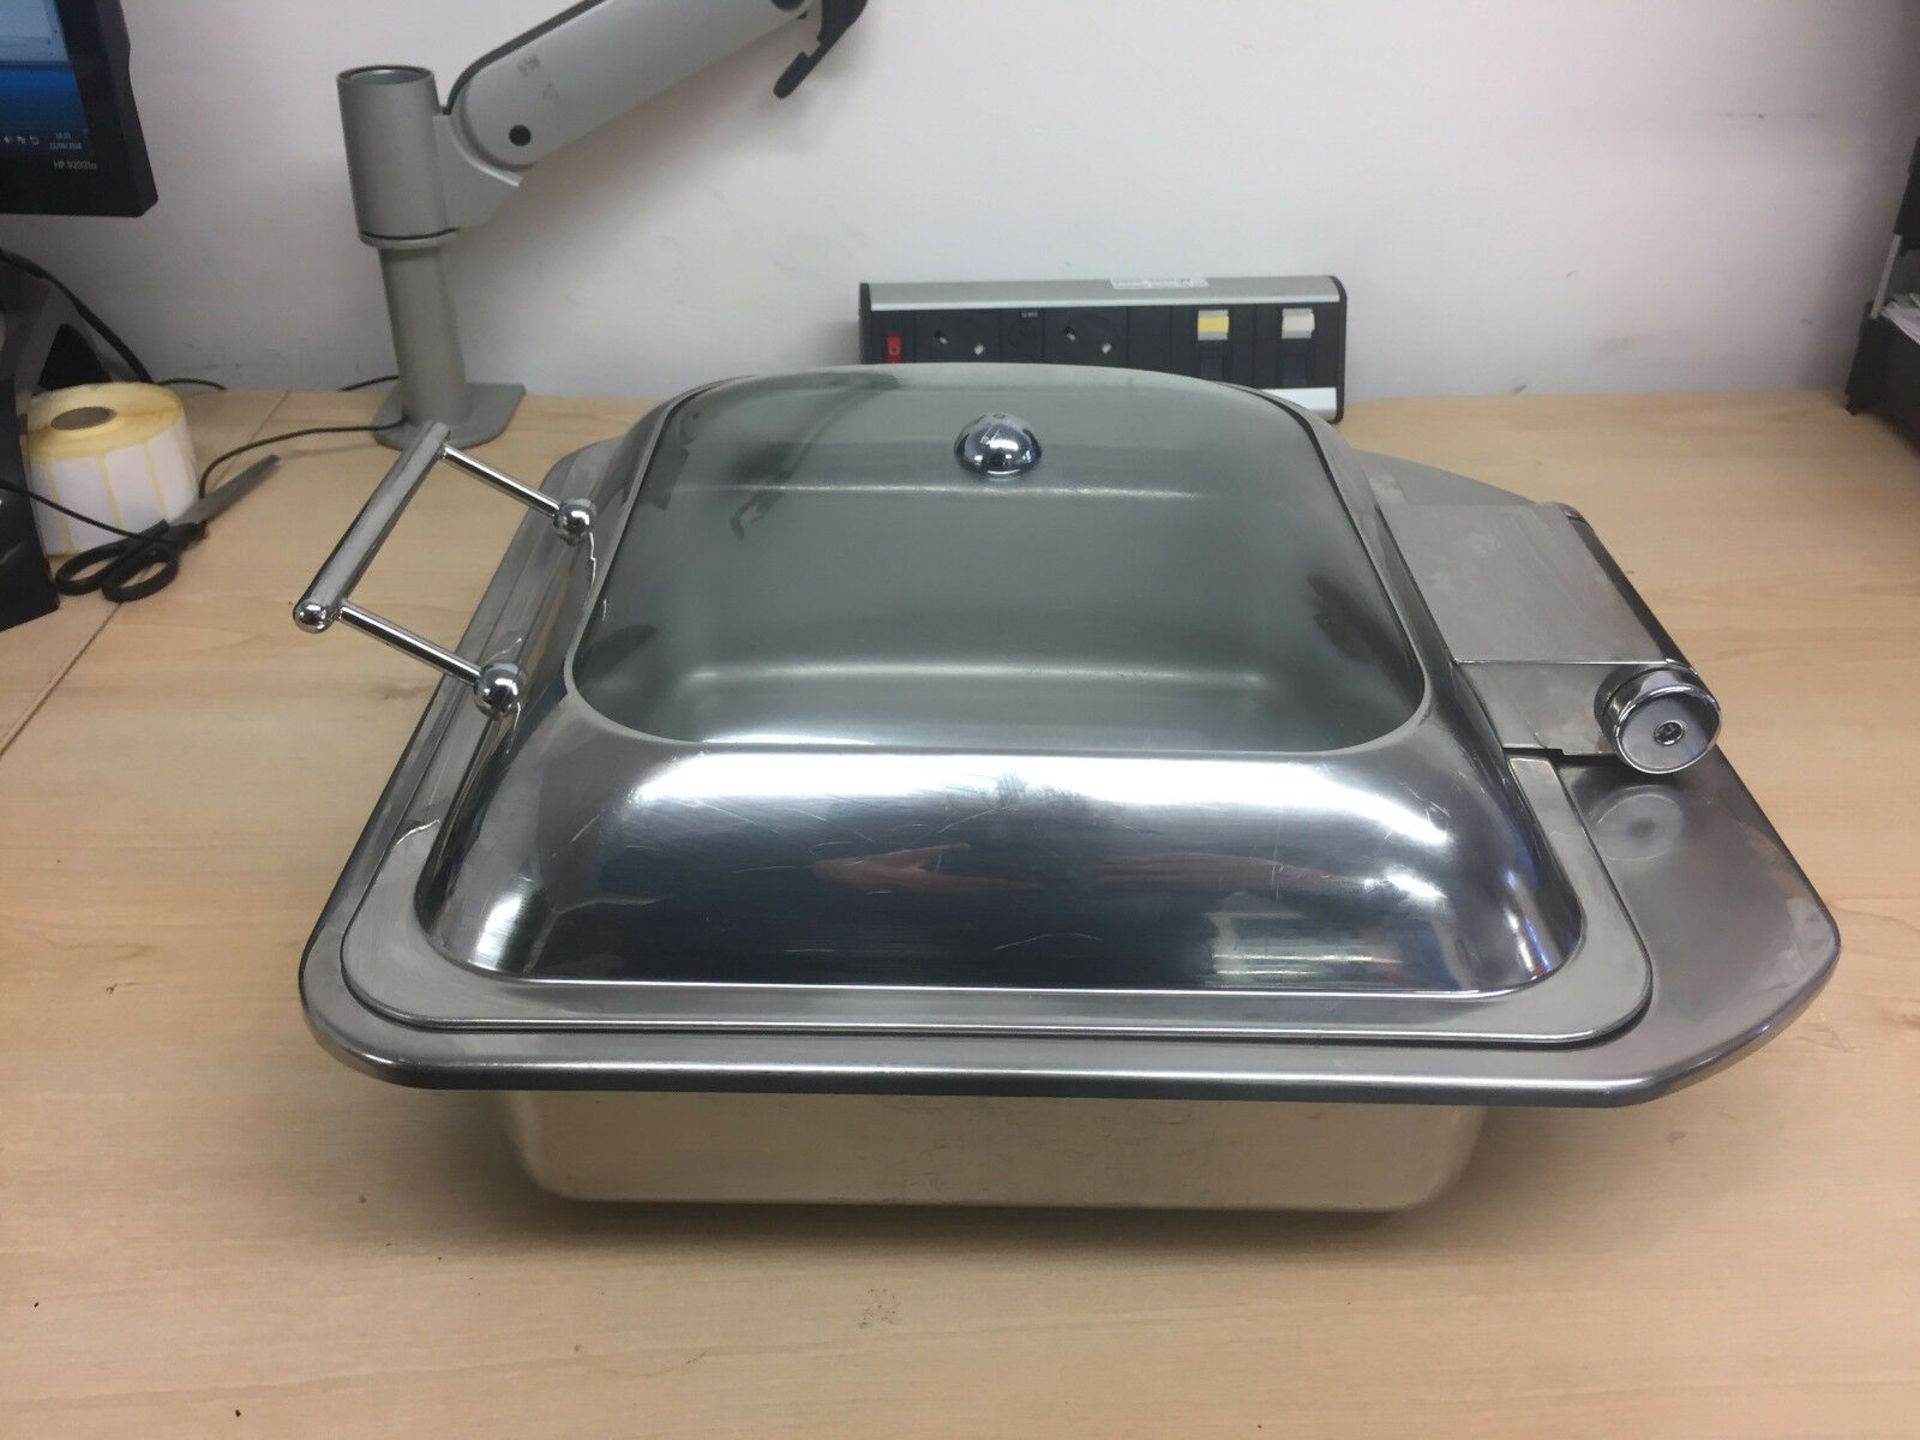 1 x Lacor Luxe GN 2/3 Chafing Dish - Stainless Steel Silver Finish - 41 x 43 x 20 cm - 5.5 - Image 5 of 5